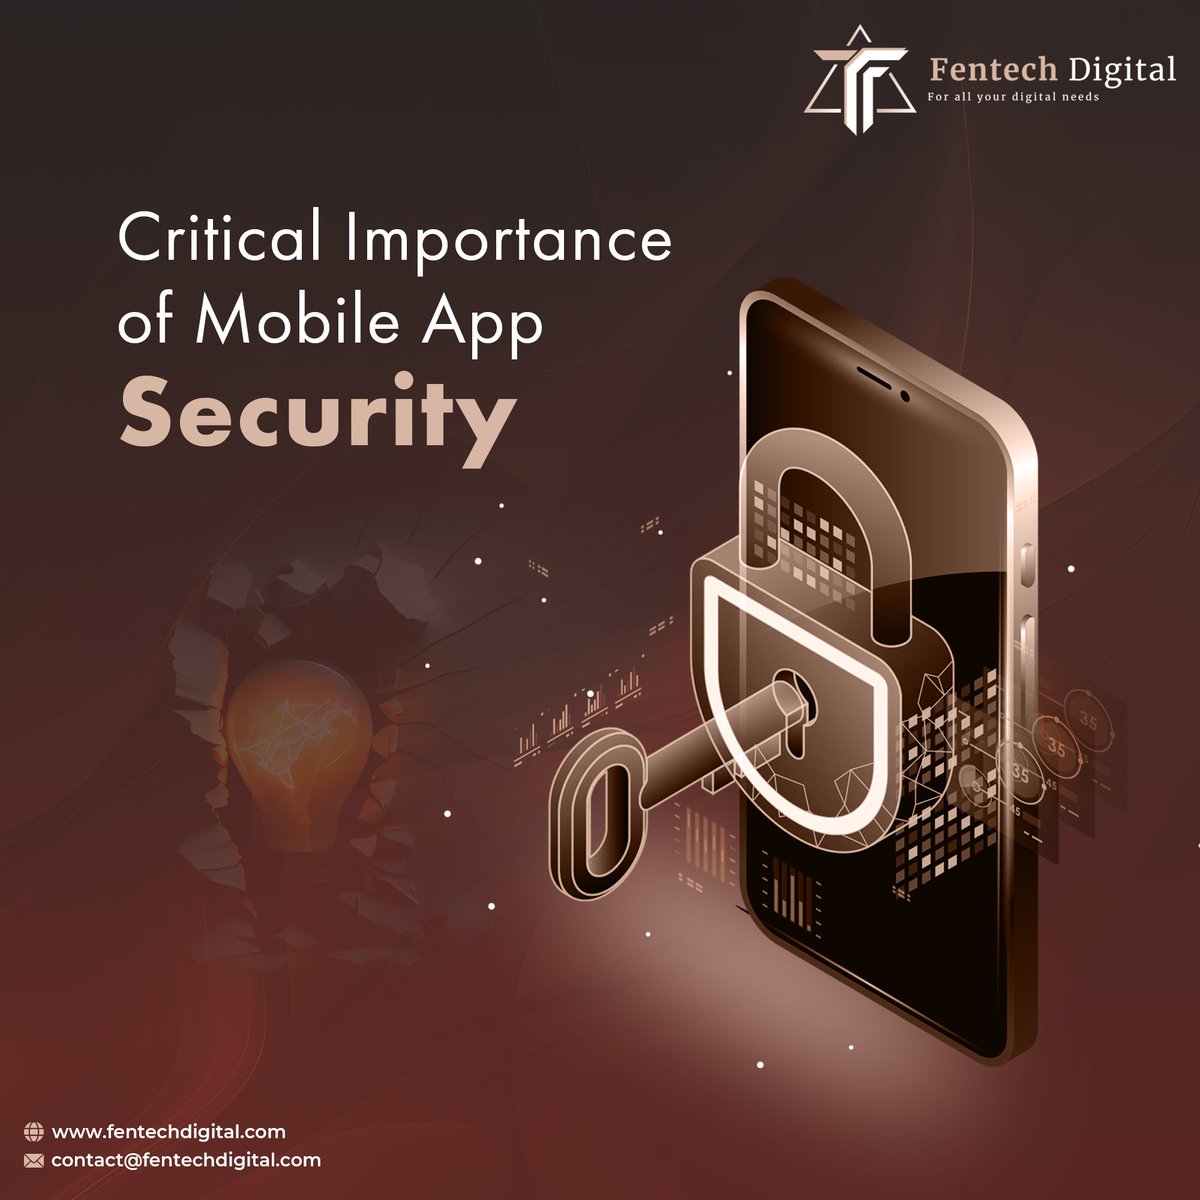 Mobile app success hinges on robust security, especially in finance and healthcare. Protecting user data is paramount for legal compliance and competitive edge in the crowded app market.

#securitycode #mobileappdevelopment